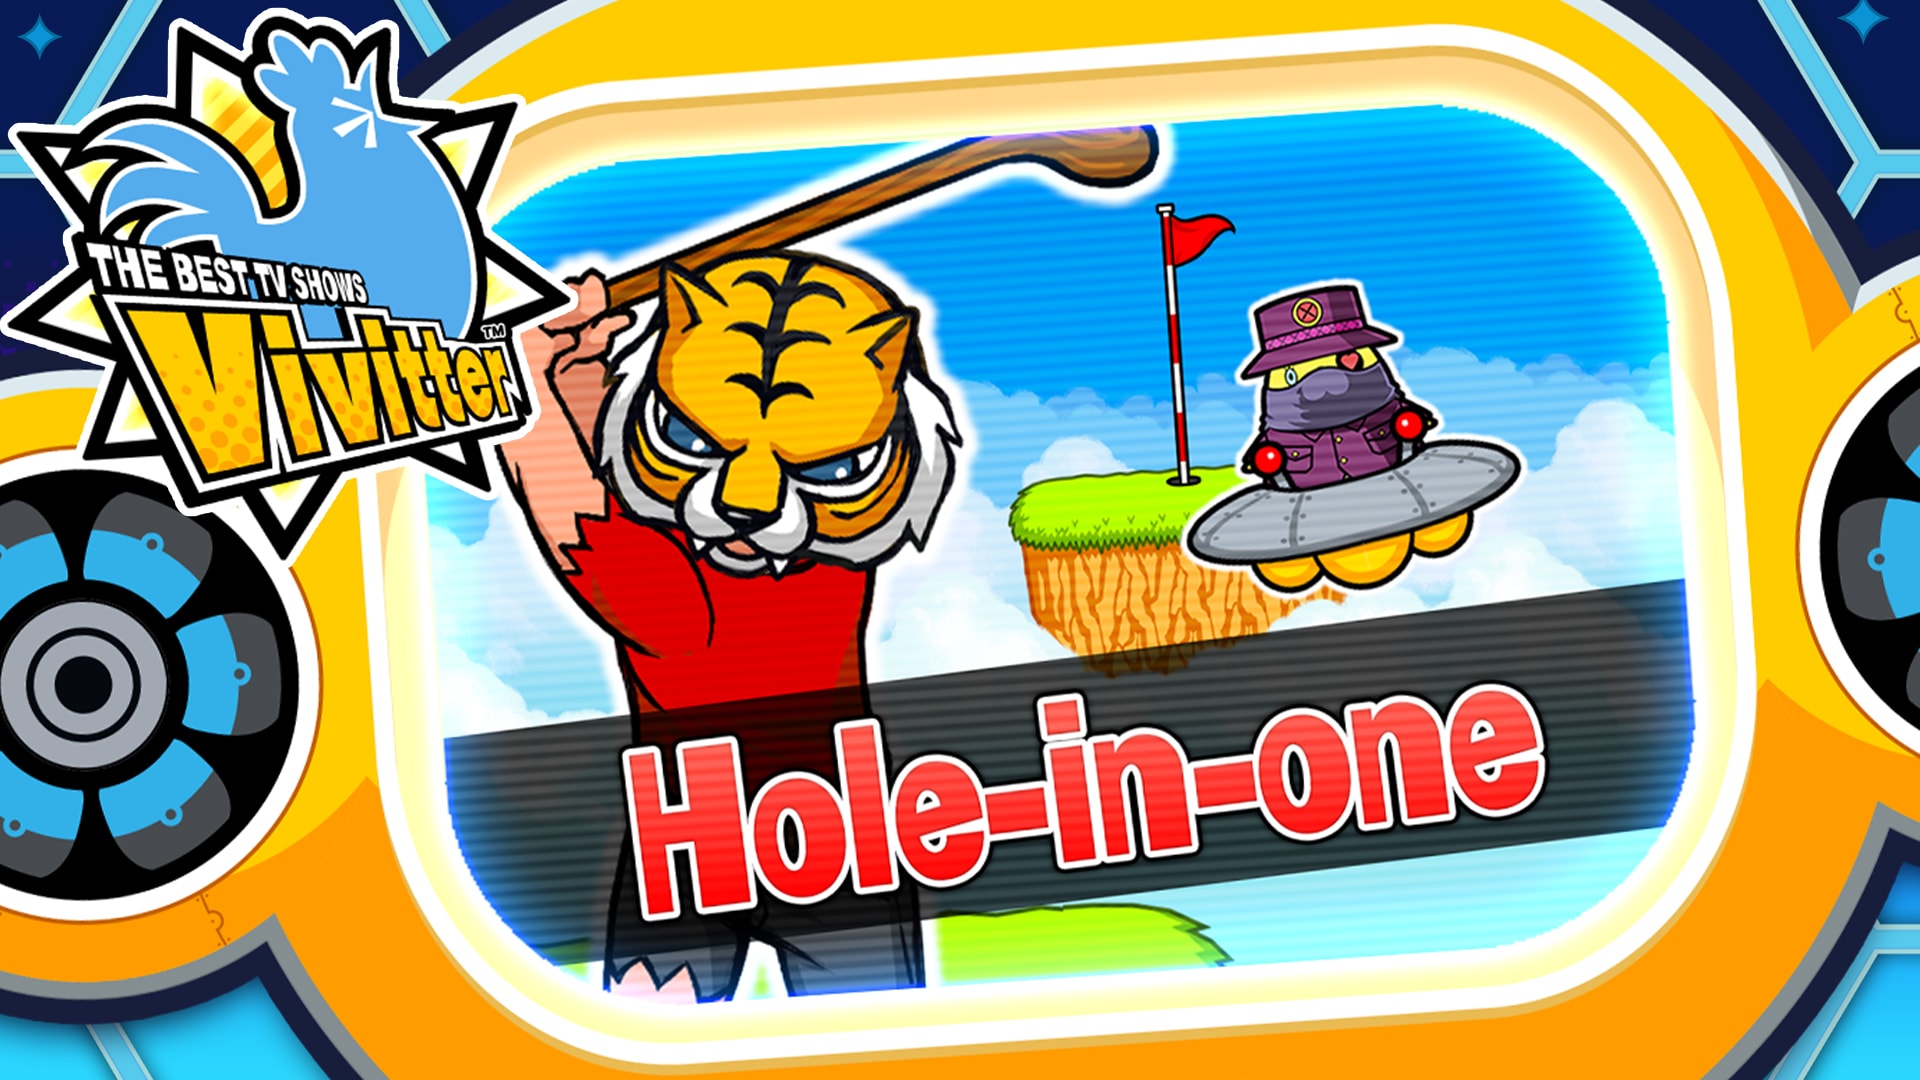 Additional mini-game "Hole-in-one"